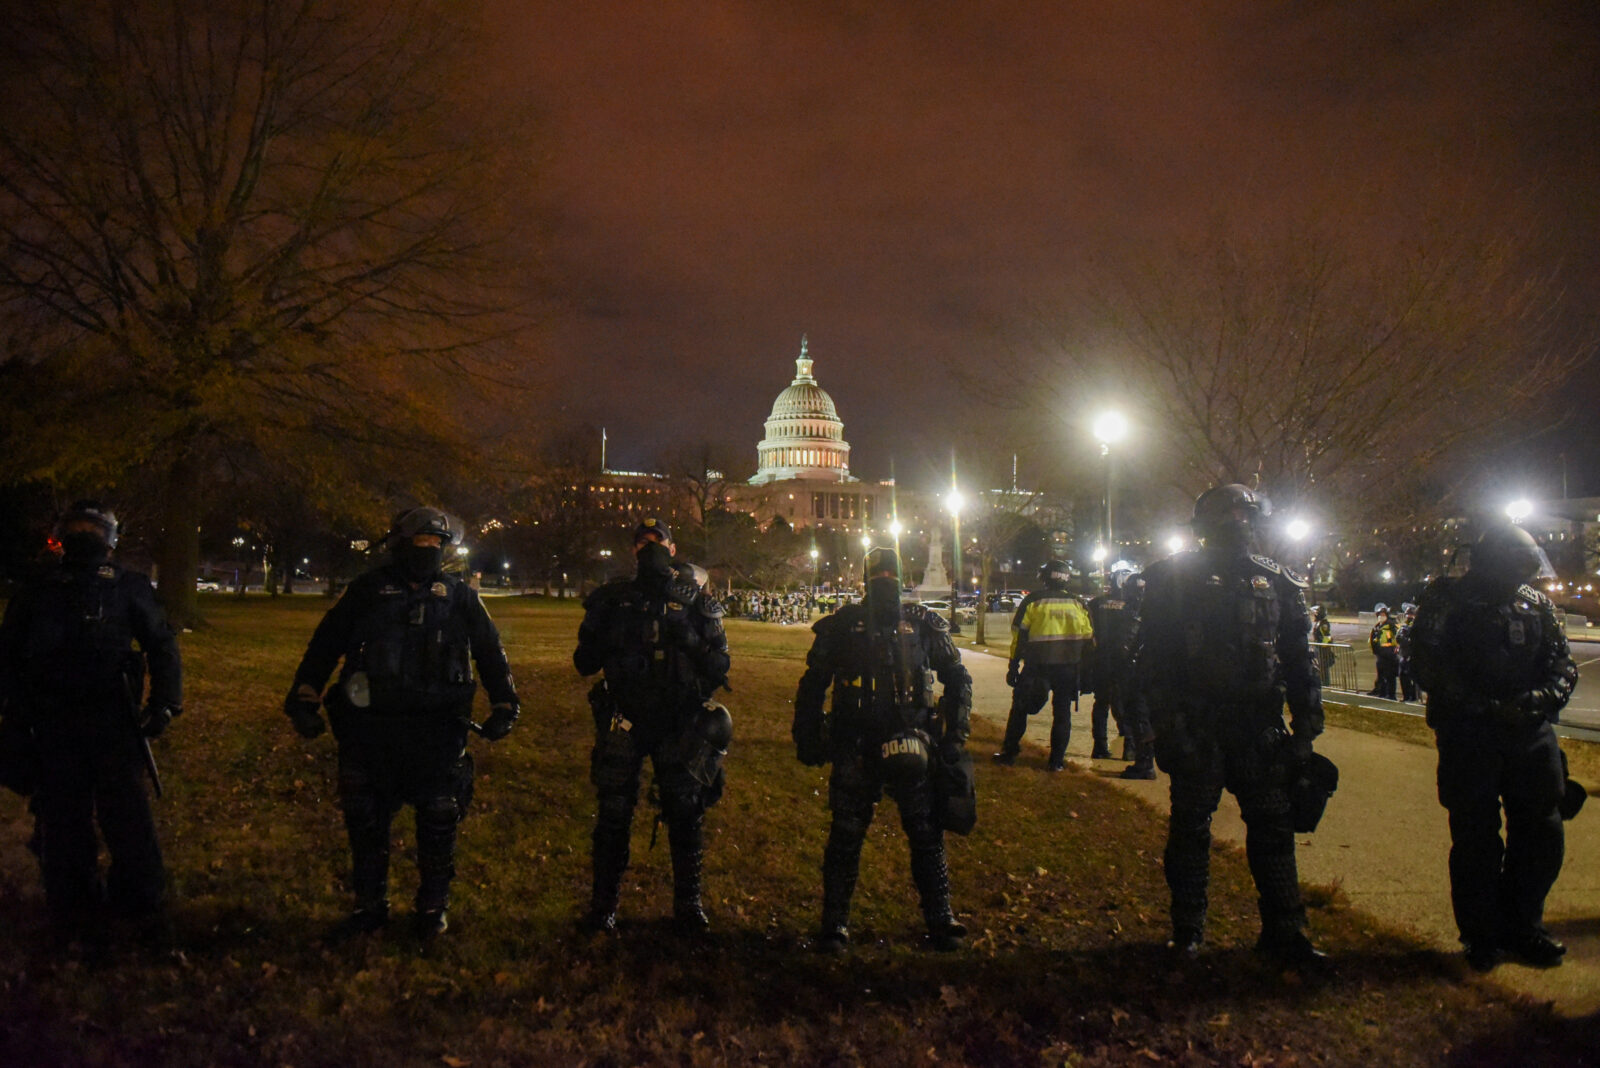 FILE PHOTO: Security forces stand guard as the surroundings of the U.S. Capitol are empty during a curfew in Washington